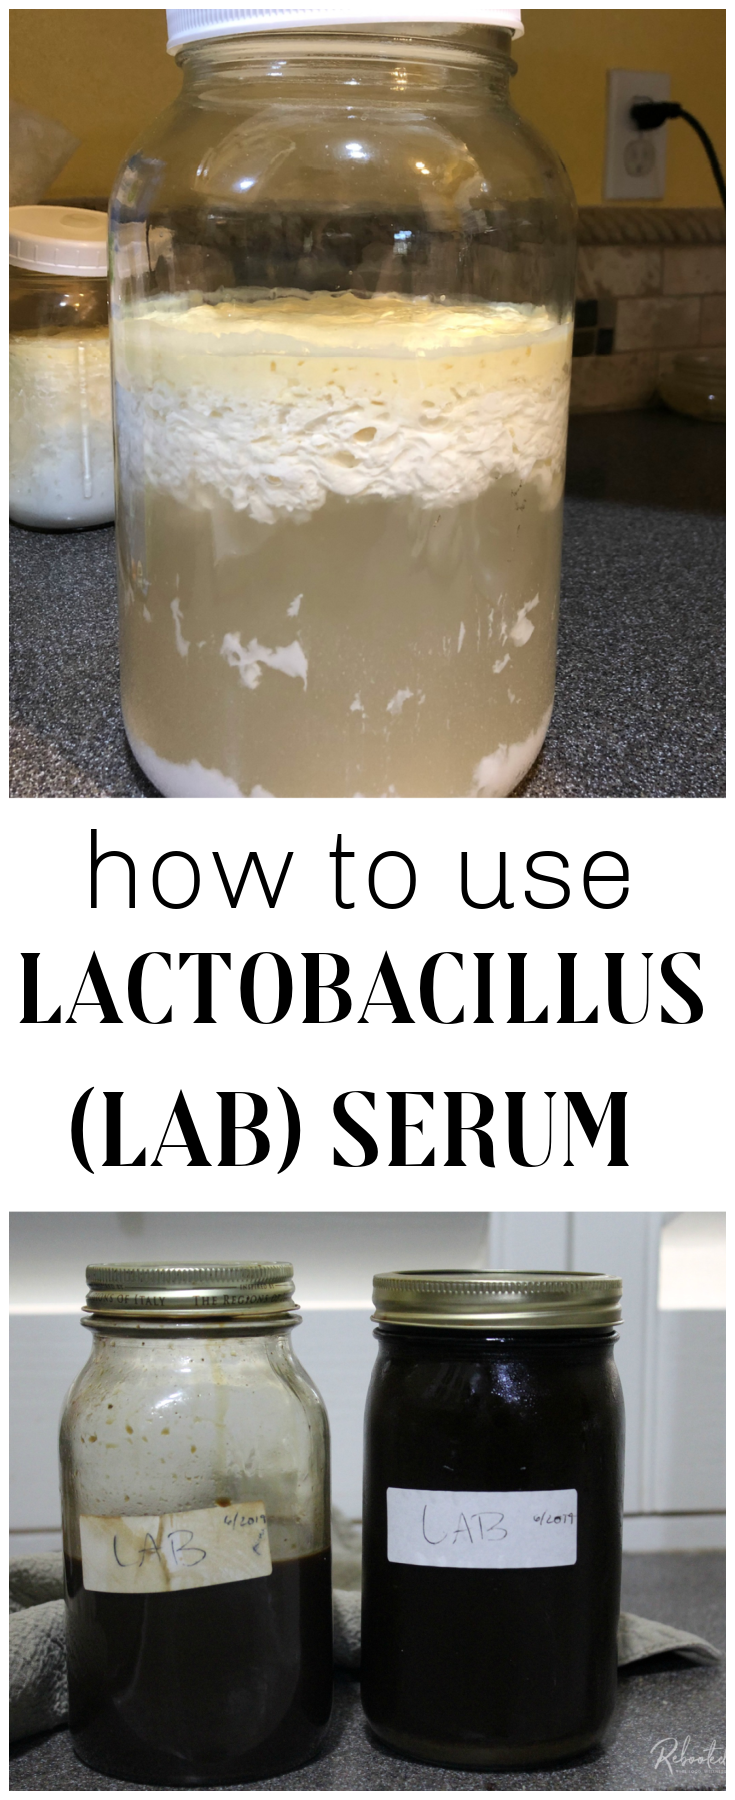 Lactobacillus is a genus of very beneficial bacteria that can be a tremendous asset to your home, garden, and even personal digestion. Learn all the ways lactobacillus serum can be used to enhance your home or garden.